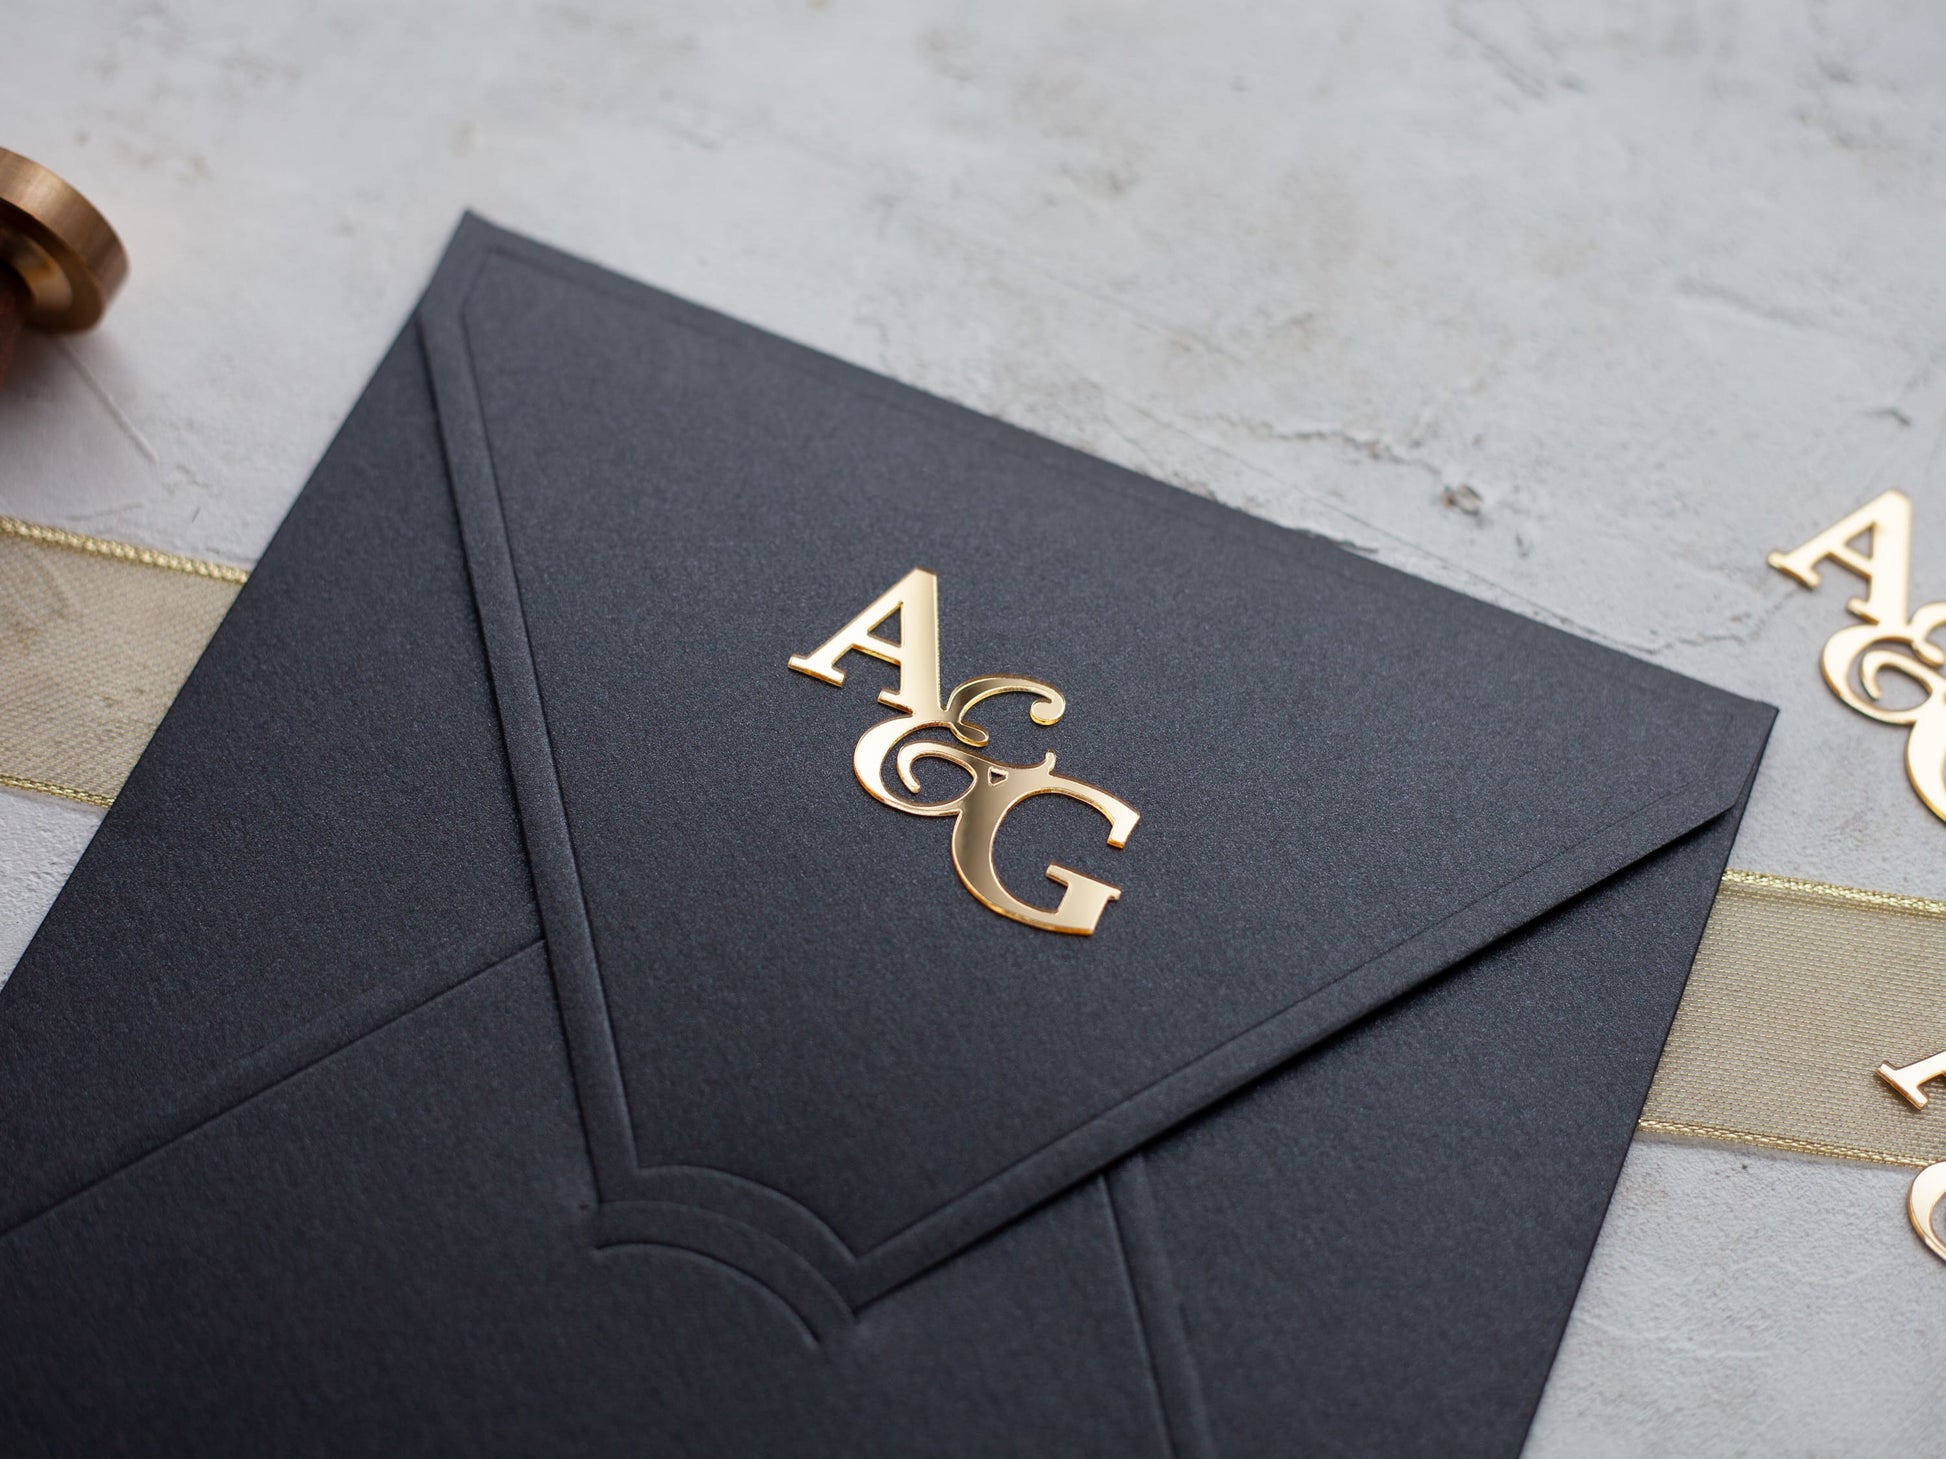 Elegant Gold Wax & Seal for Wedding Invitations - Pre-Made Monogram and  Custom Options Available